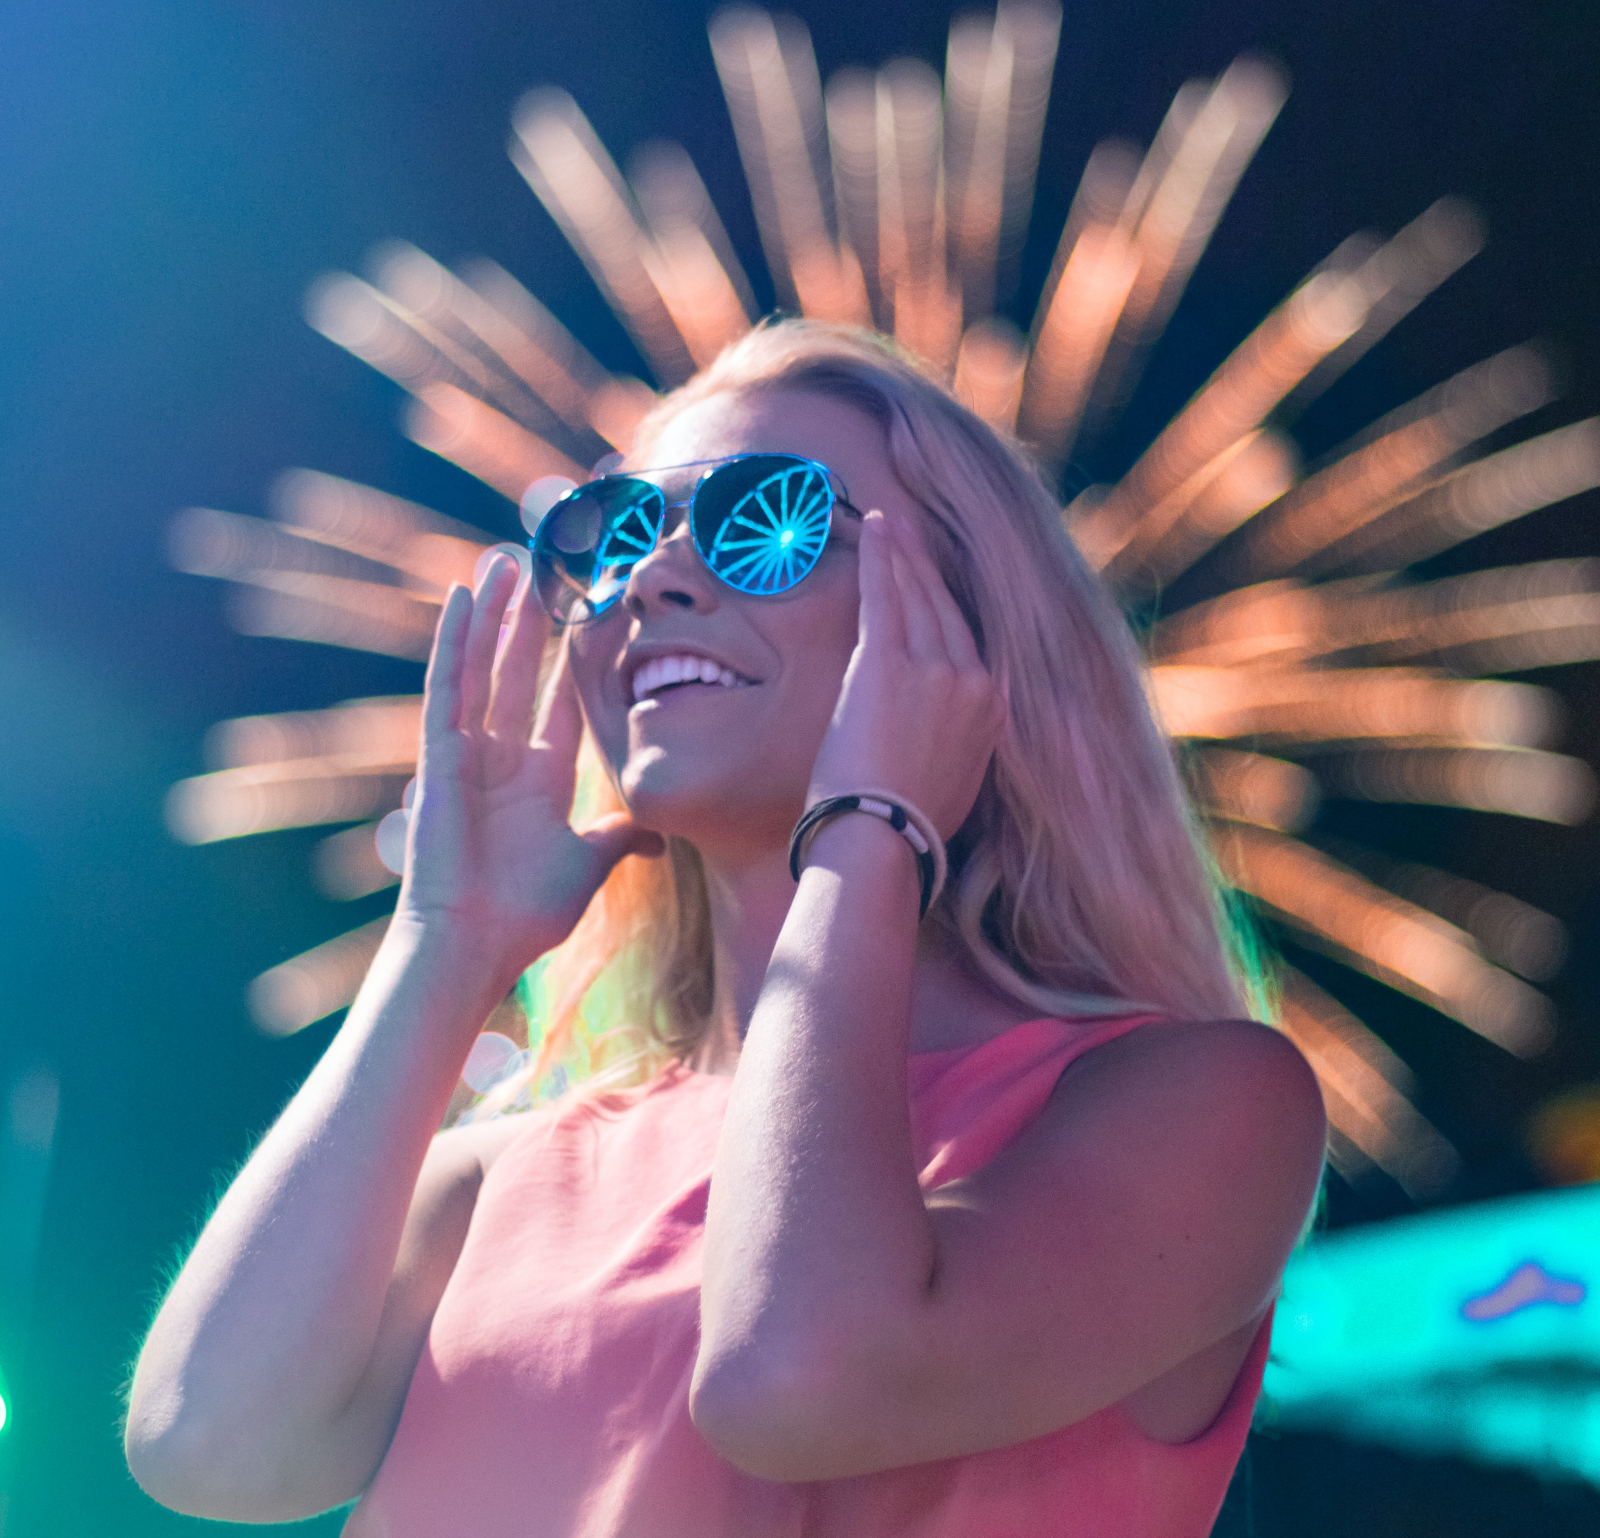 Excited woman with dark sunglasses and fireworks in background